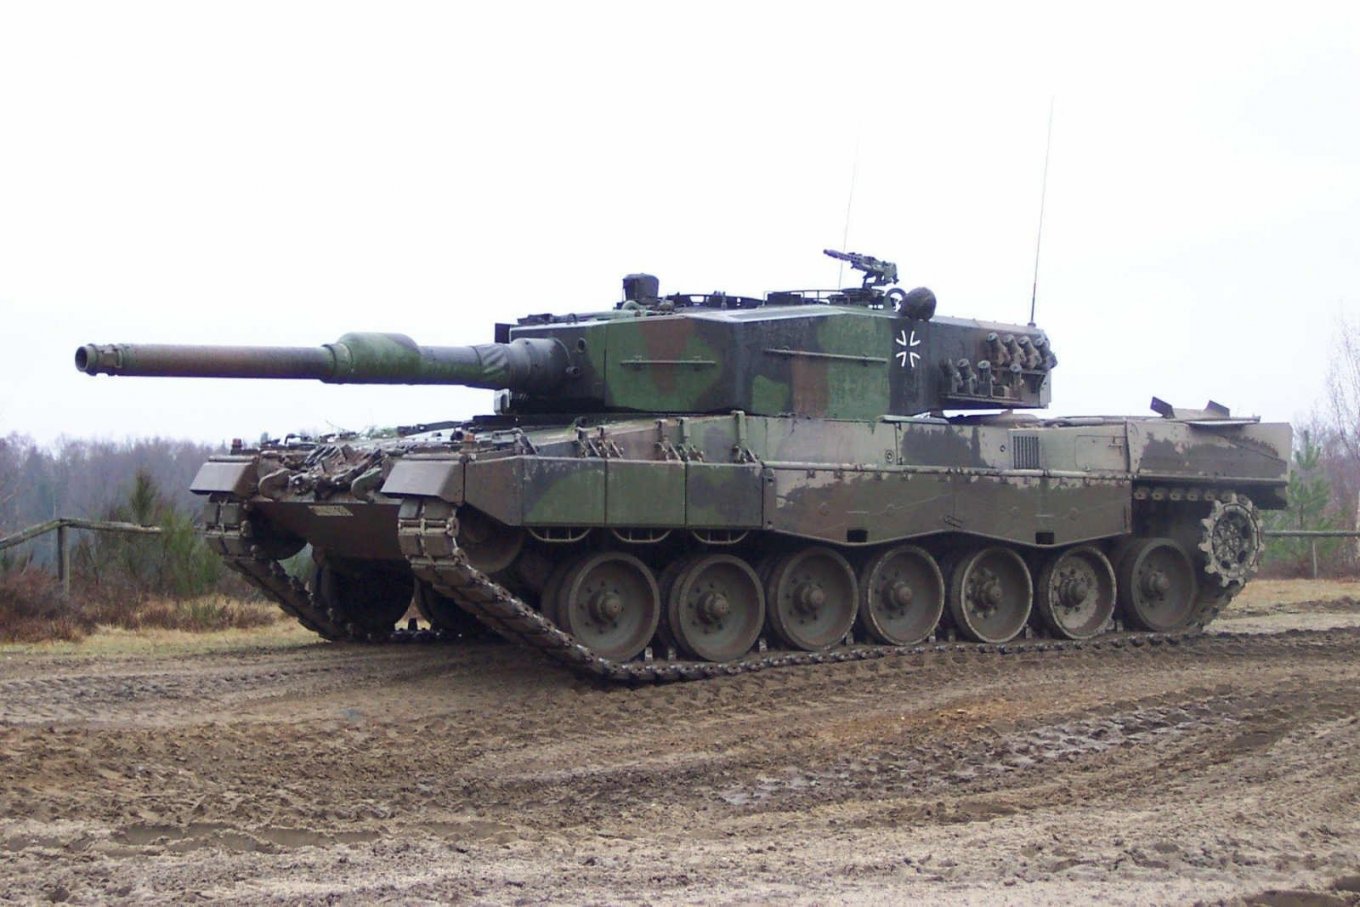 Leopard 2A4 tank, EU to Accelerate Support of Ukraine in Fight for Freedom: Western Tanks, Training Mission and Membership in the Bloc in the Agenda, Defense Express